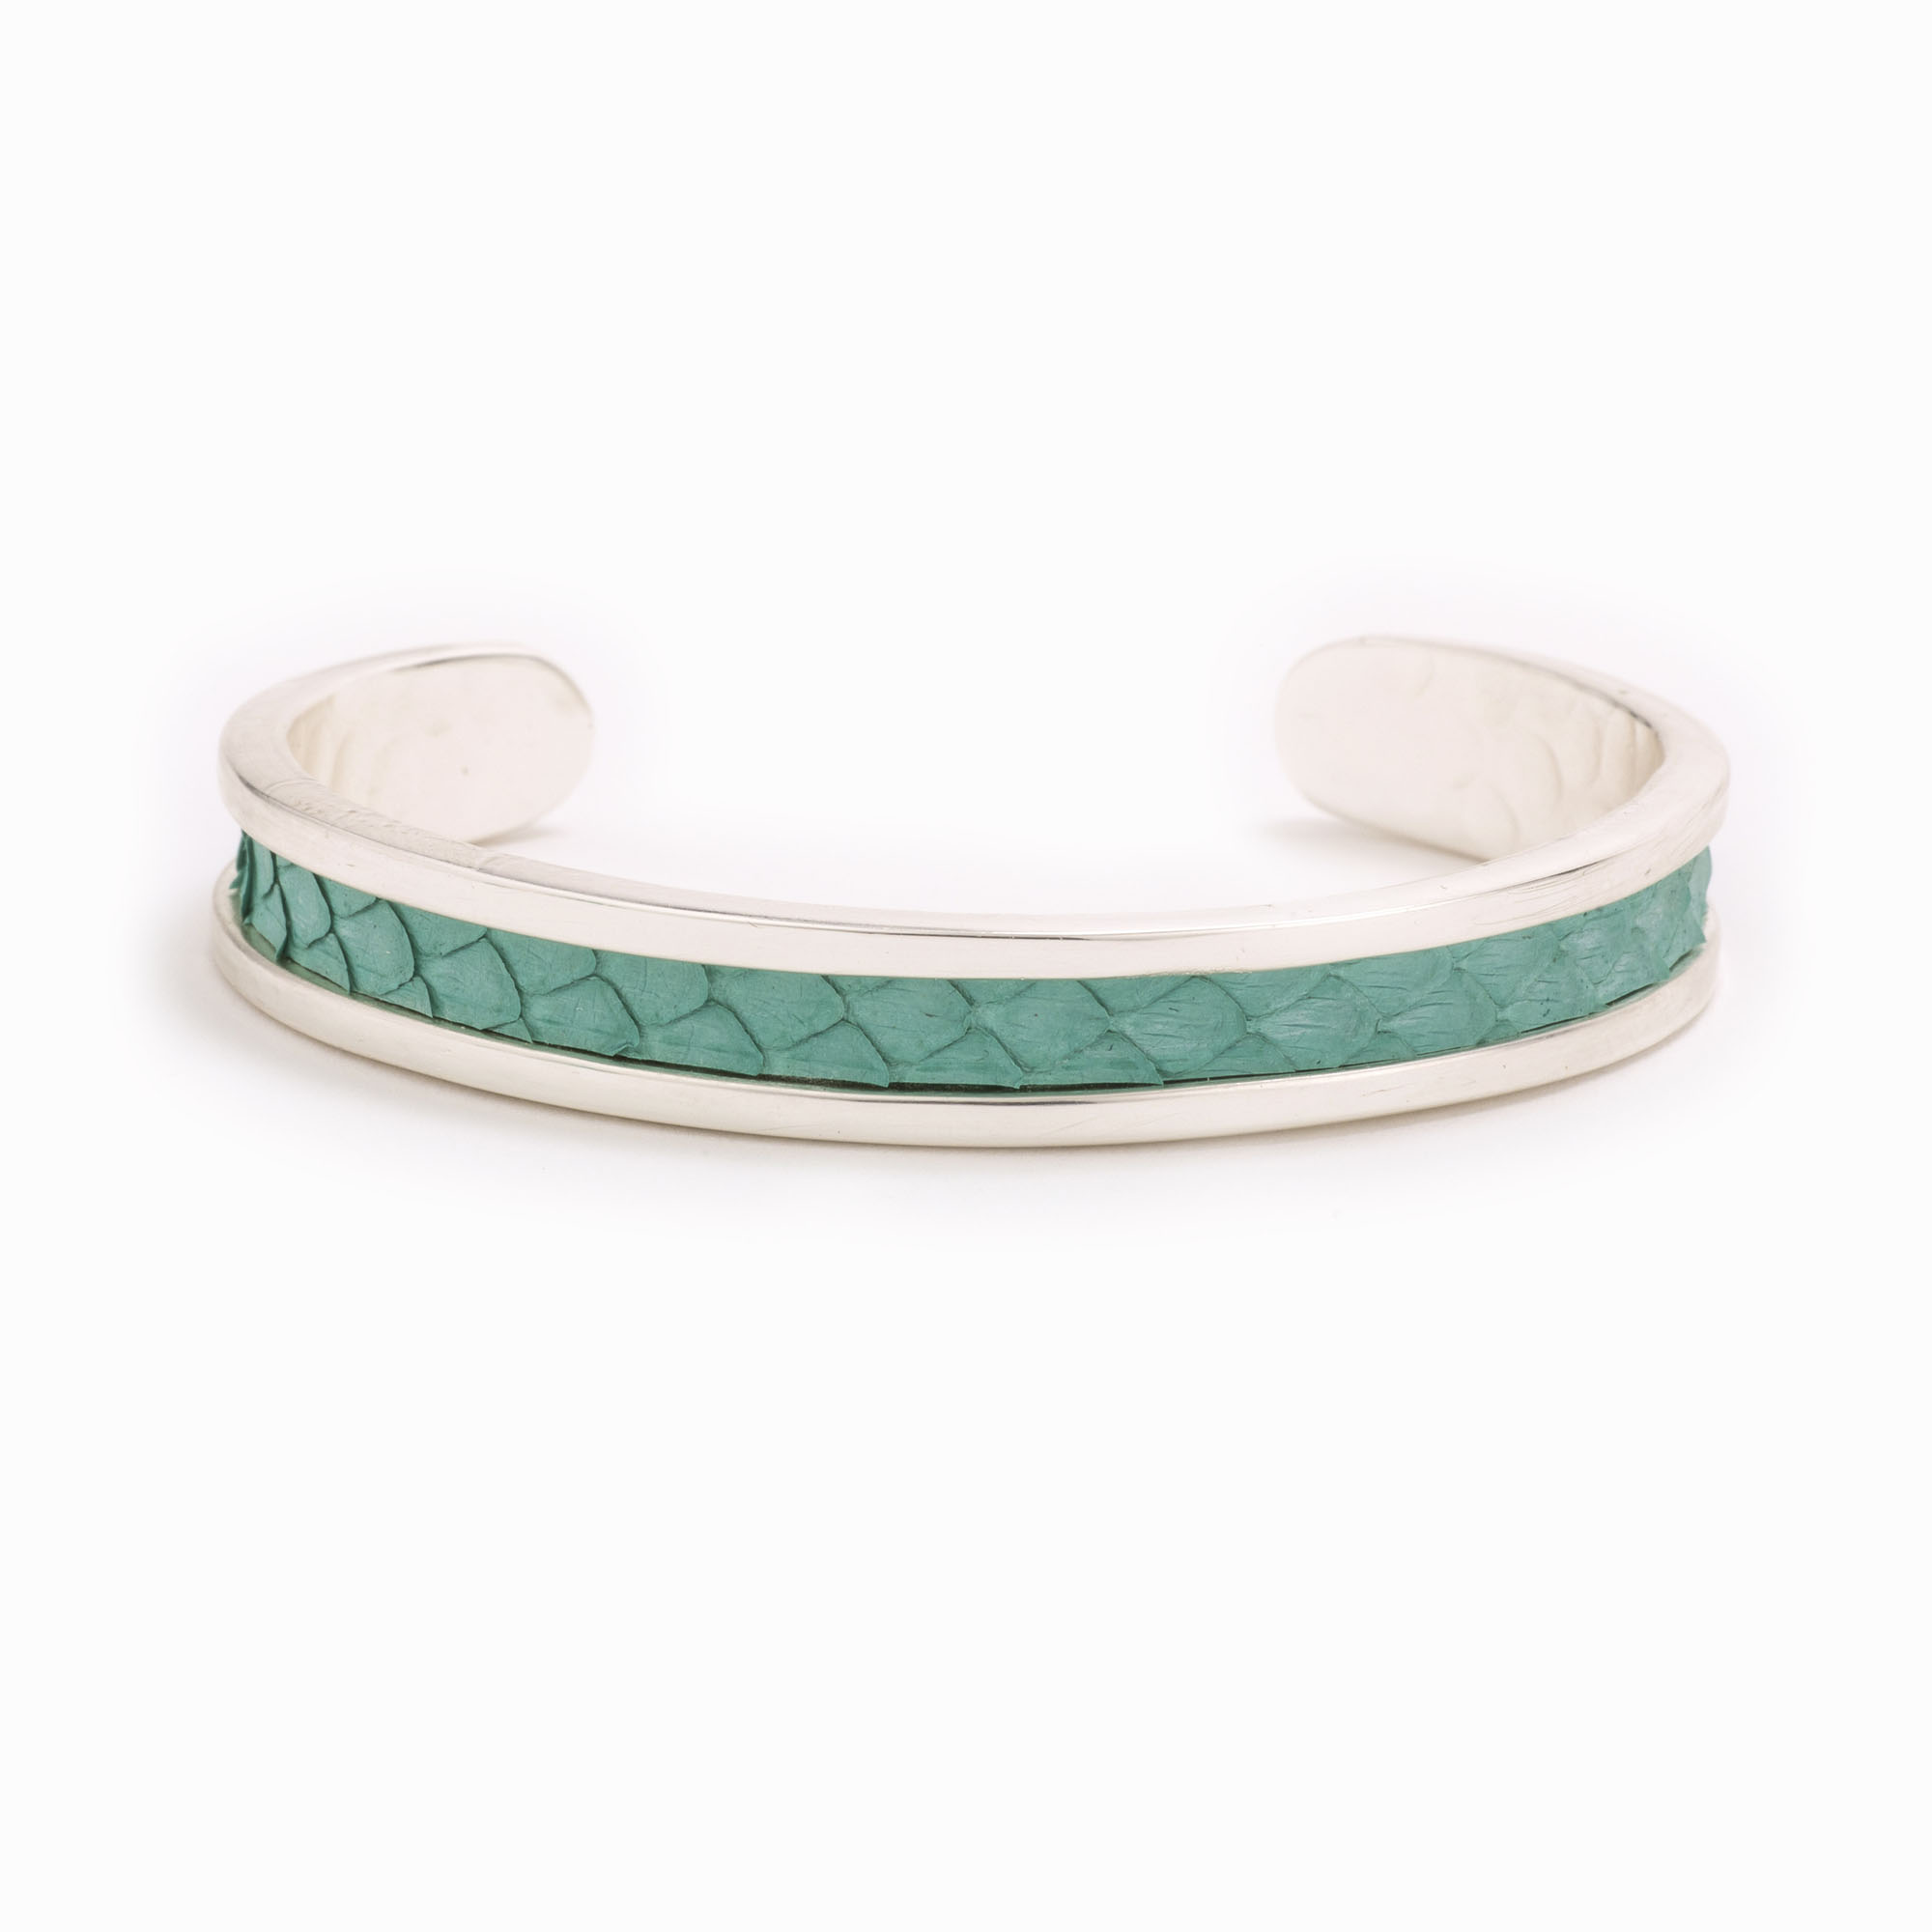 Featured image for “Small Turquoise Silver Cuff”